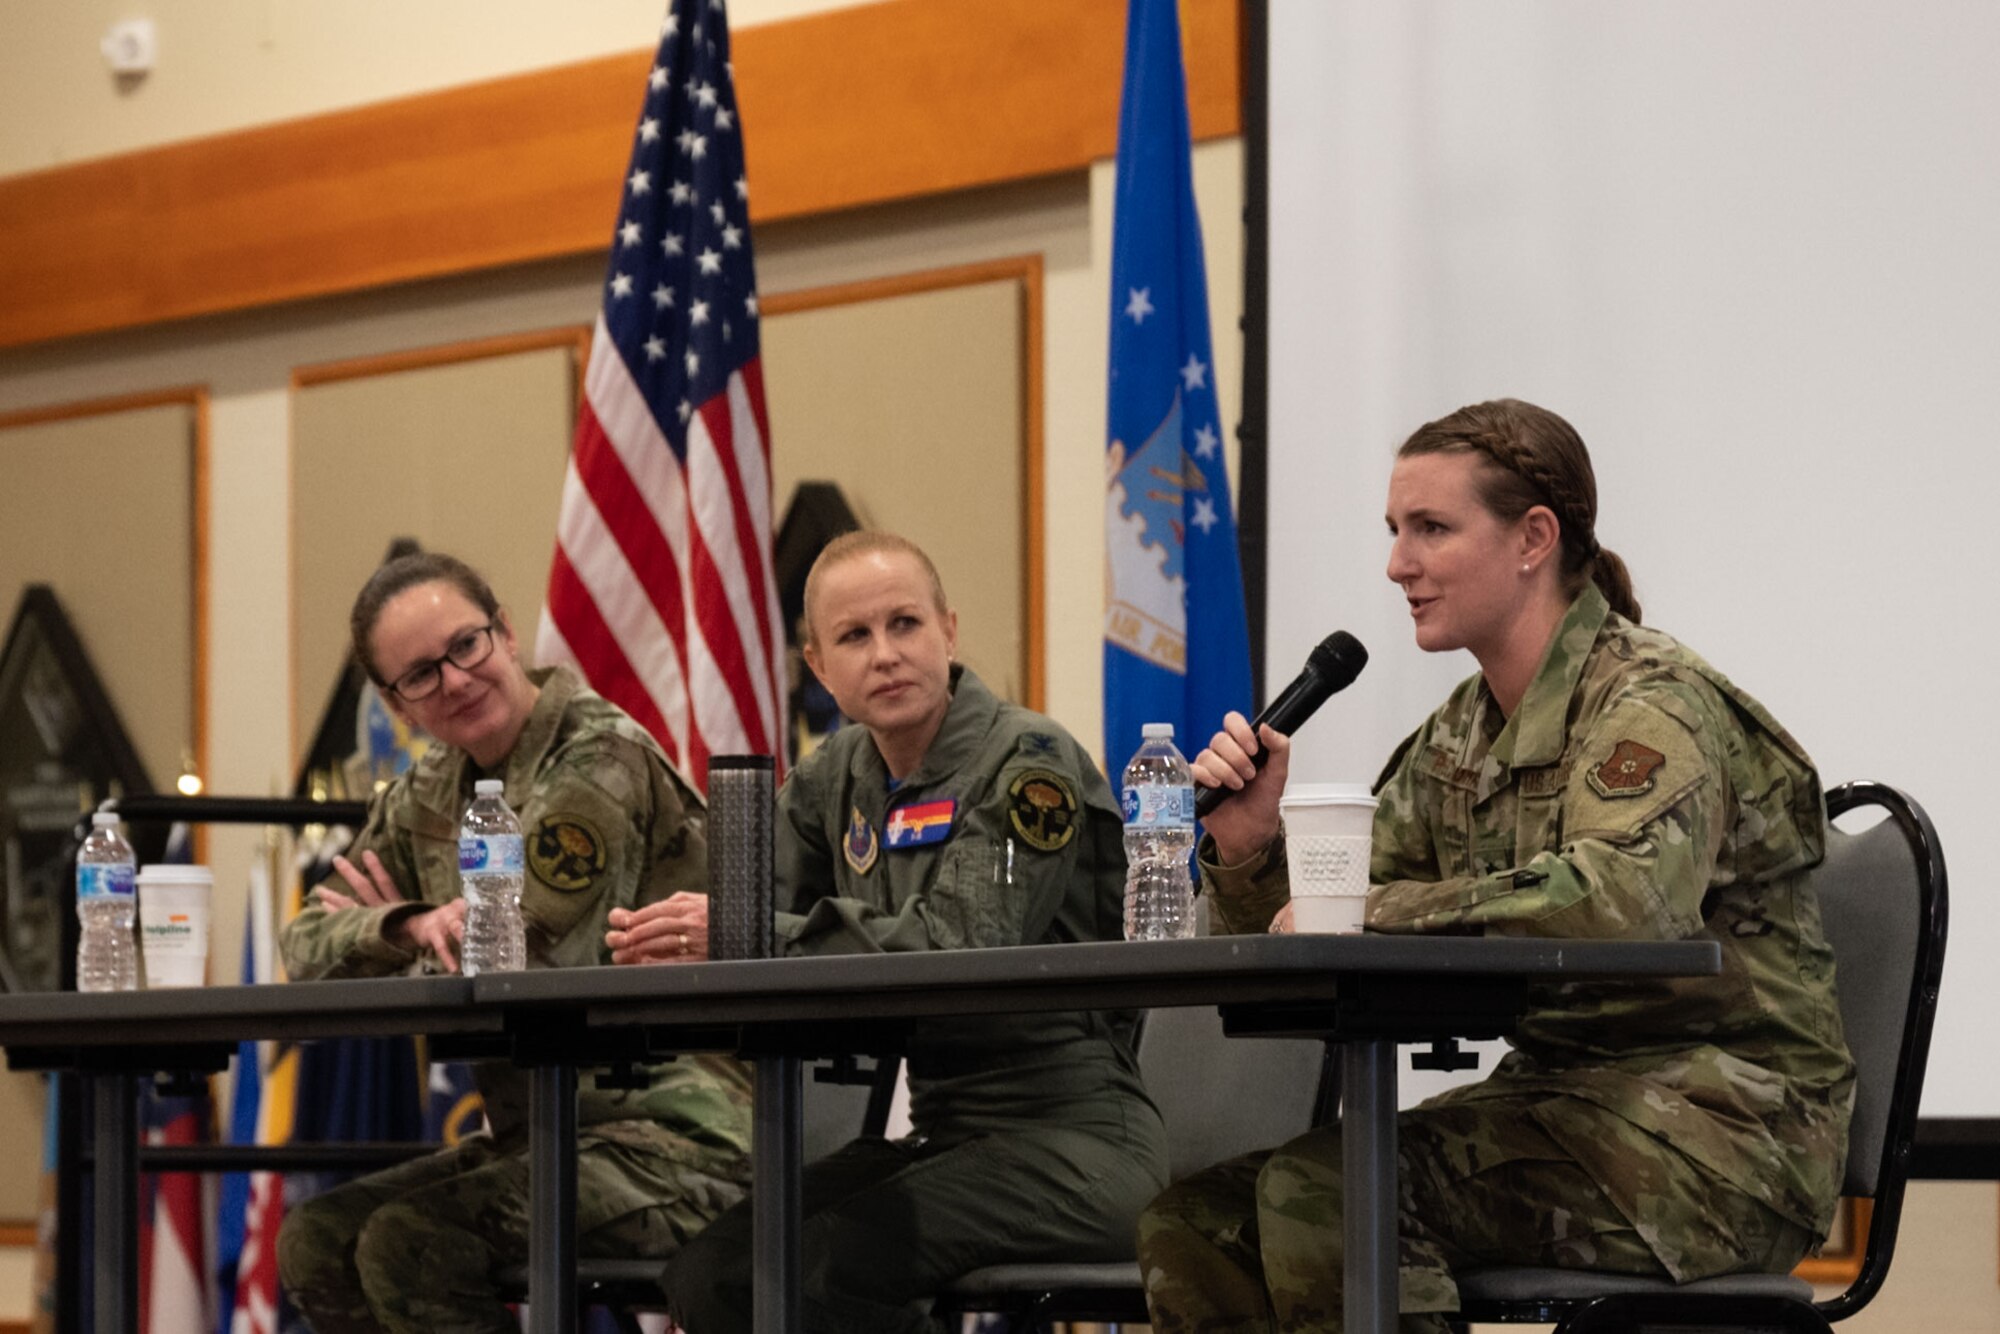 From the left Brig. Gen. Stacy Jo Huser, principal assistant deputy administrator for military application; Col. Anita Feugate Opperman, 341st Missile Wing commander; and Lt. Col. Corrie Pecoraro, 341st Force Support Squadron commander, share their experiences and answer audience questions during a Women’s History Month Symposium leadership panel March 11, 2022, at Malmstrom Air Force Base, Mont.